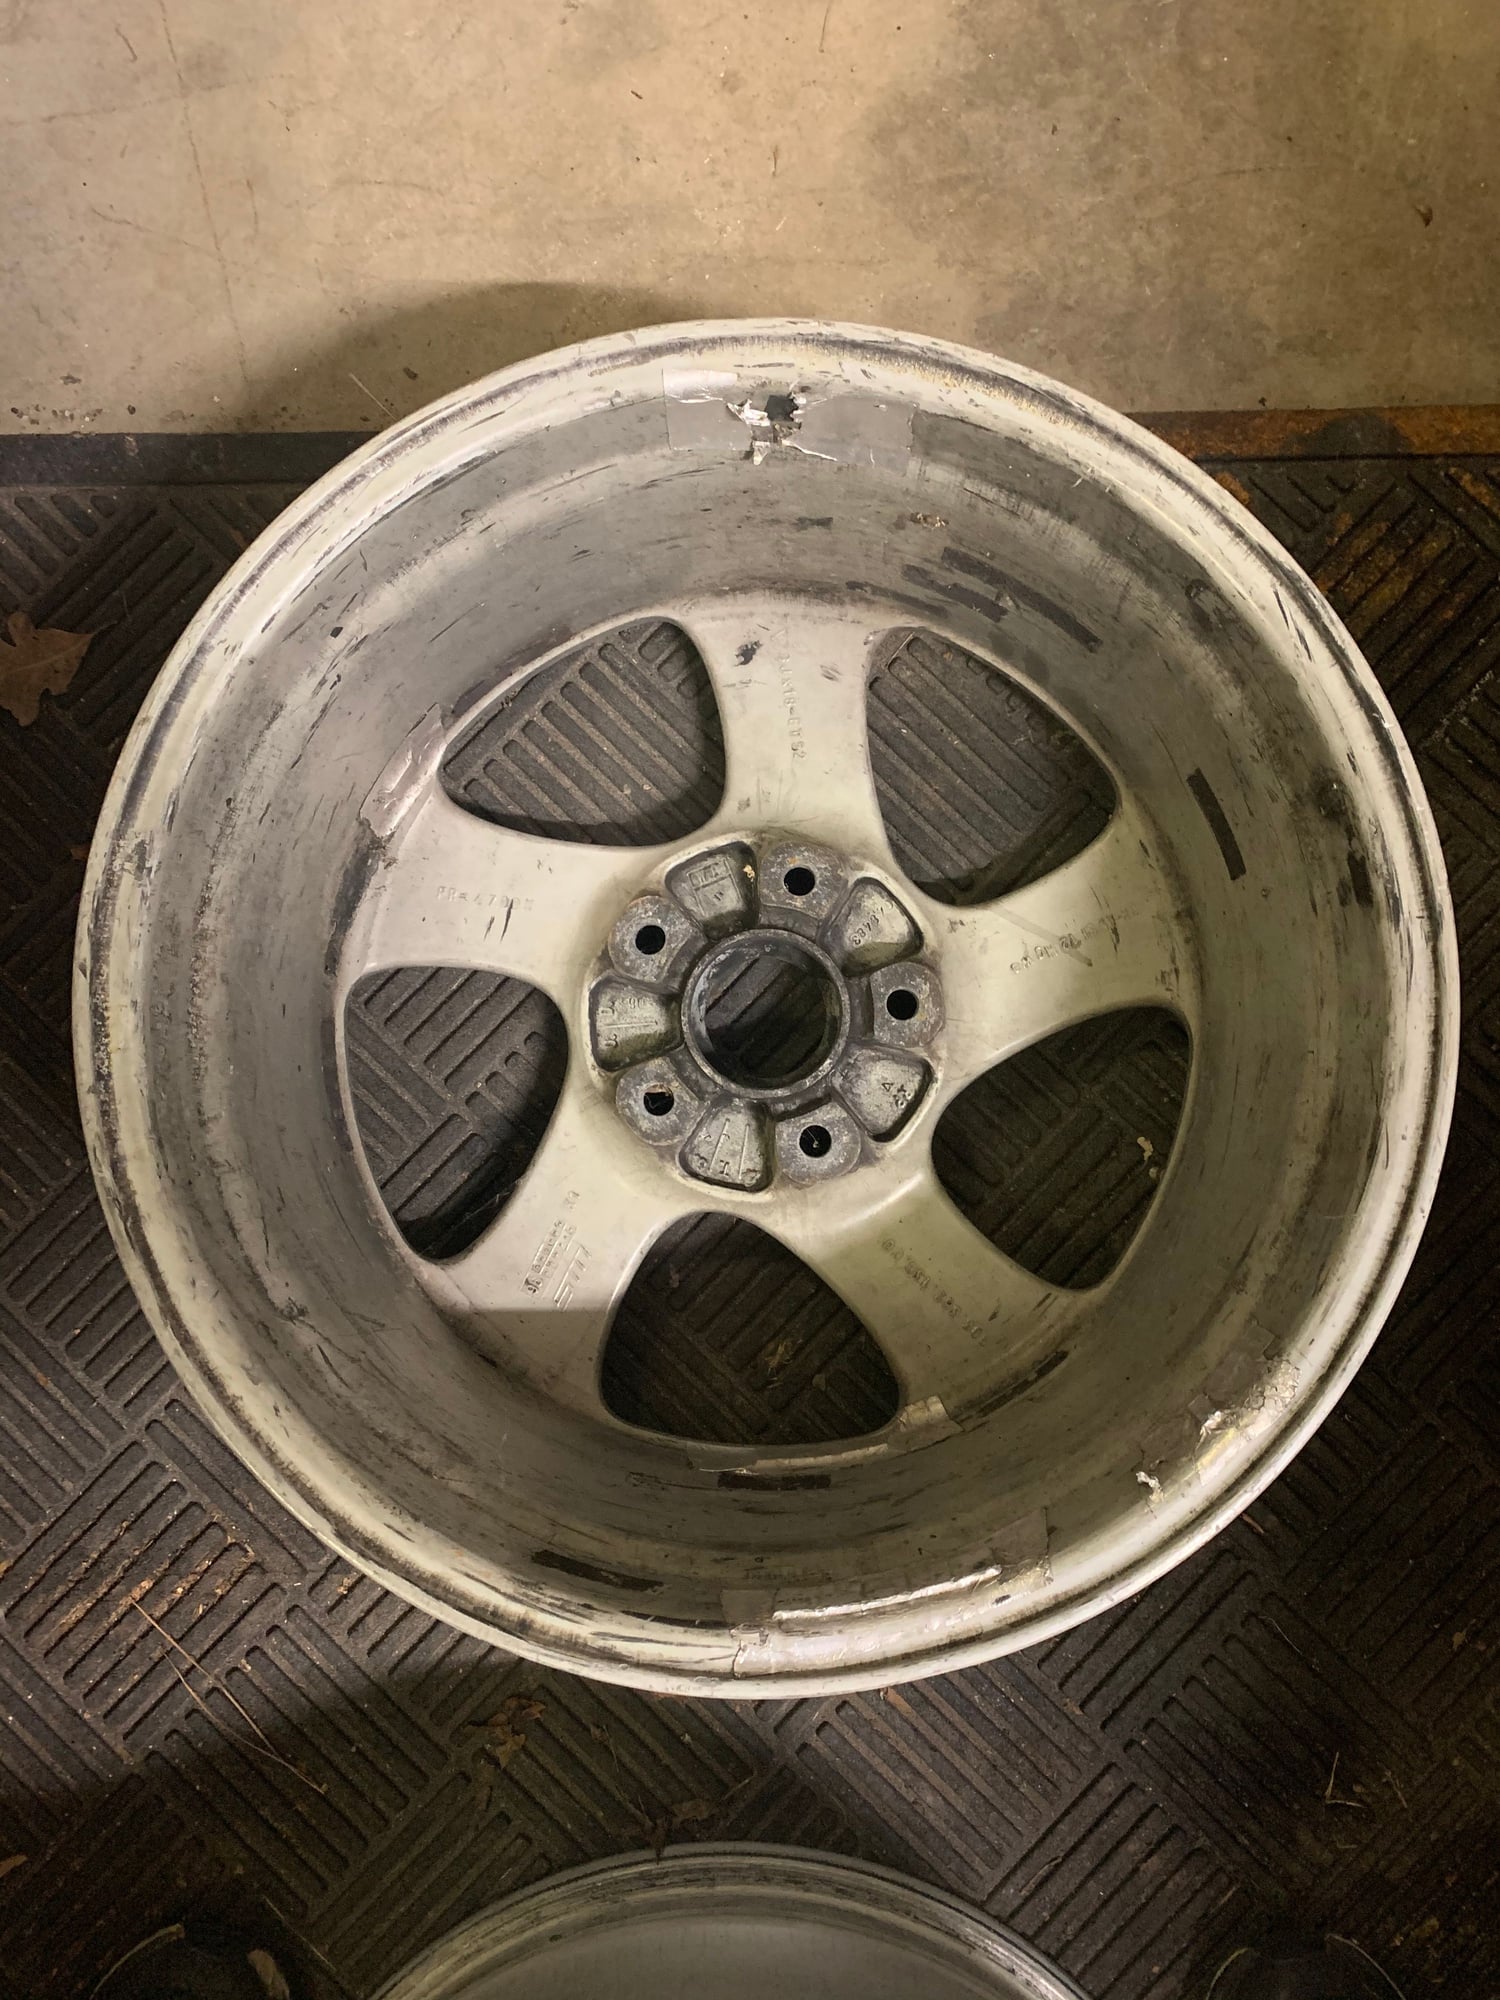 Wheels and Tires/Axles - FS: OEM 993 hollow spokes - Used - All Years Any Make All Models - Raleigh, NC 27606, United States